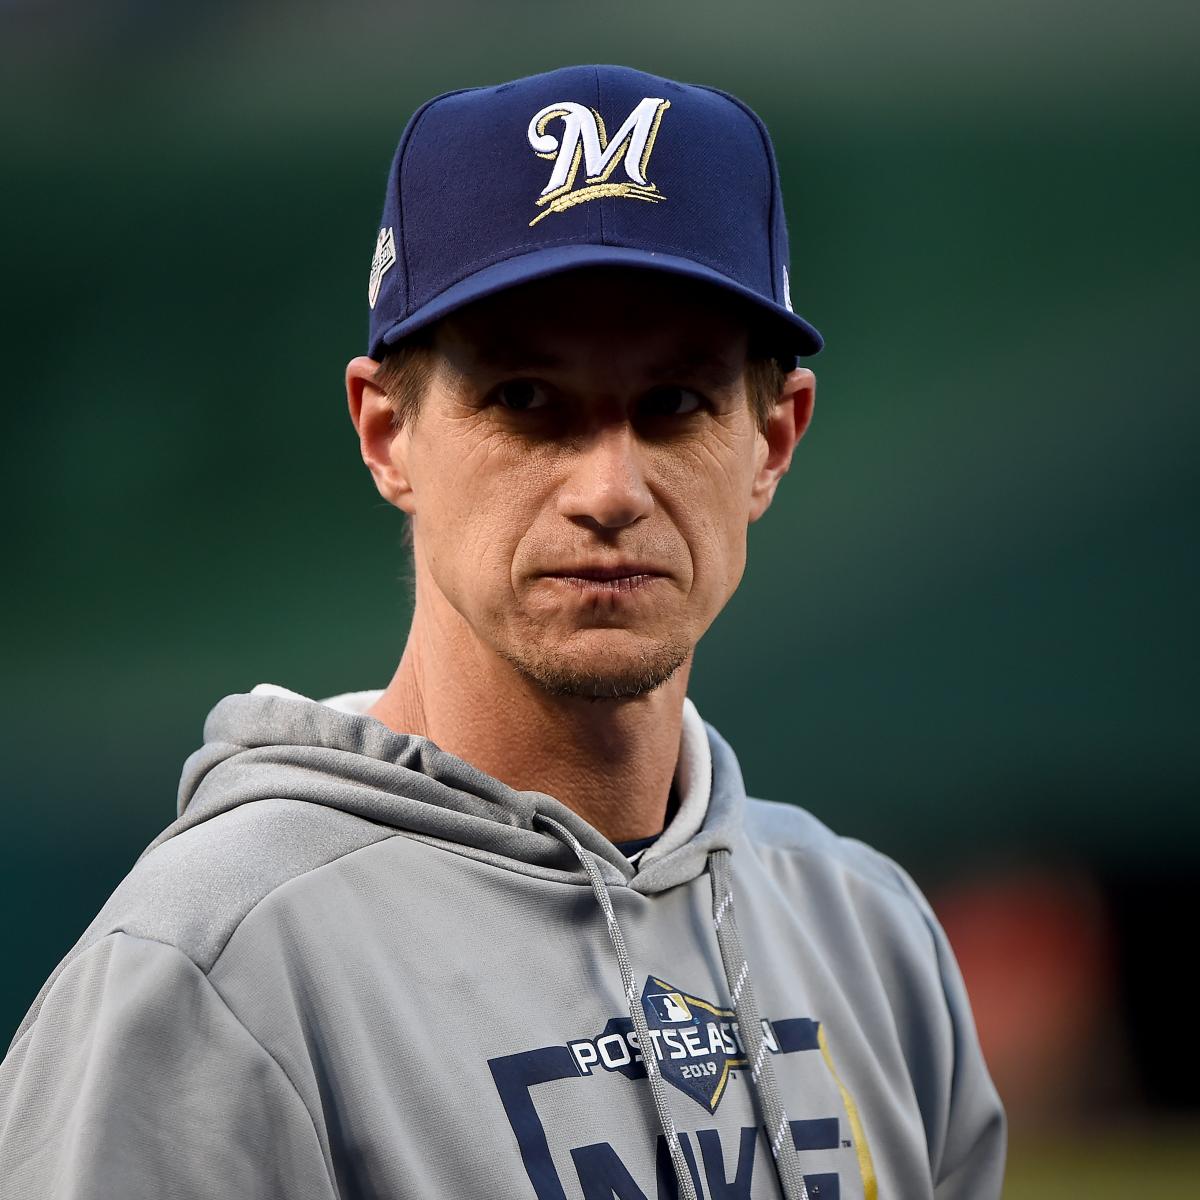 BREAKING NEWS: Craig Counsell Named Nineteenth Manager in Brewers History, by The Brewer Nation, BrewerNation